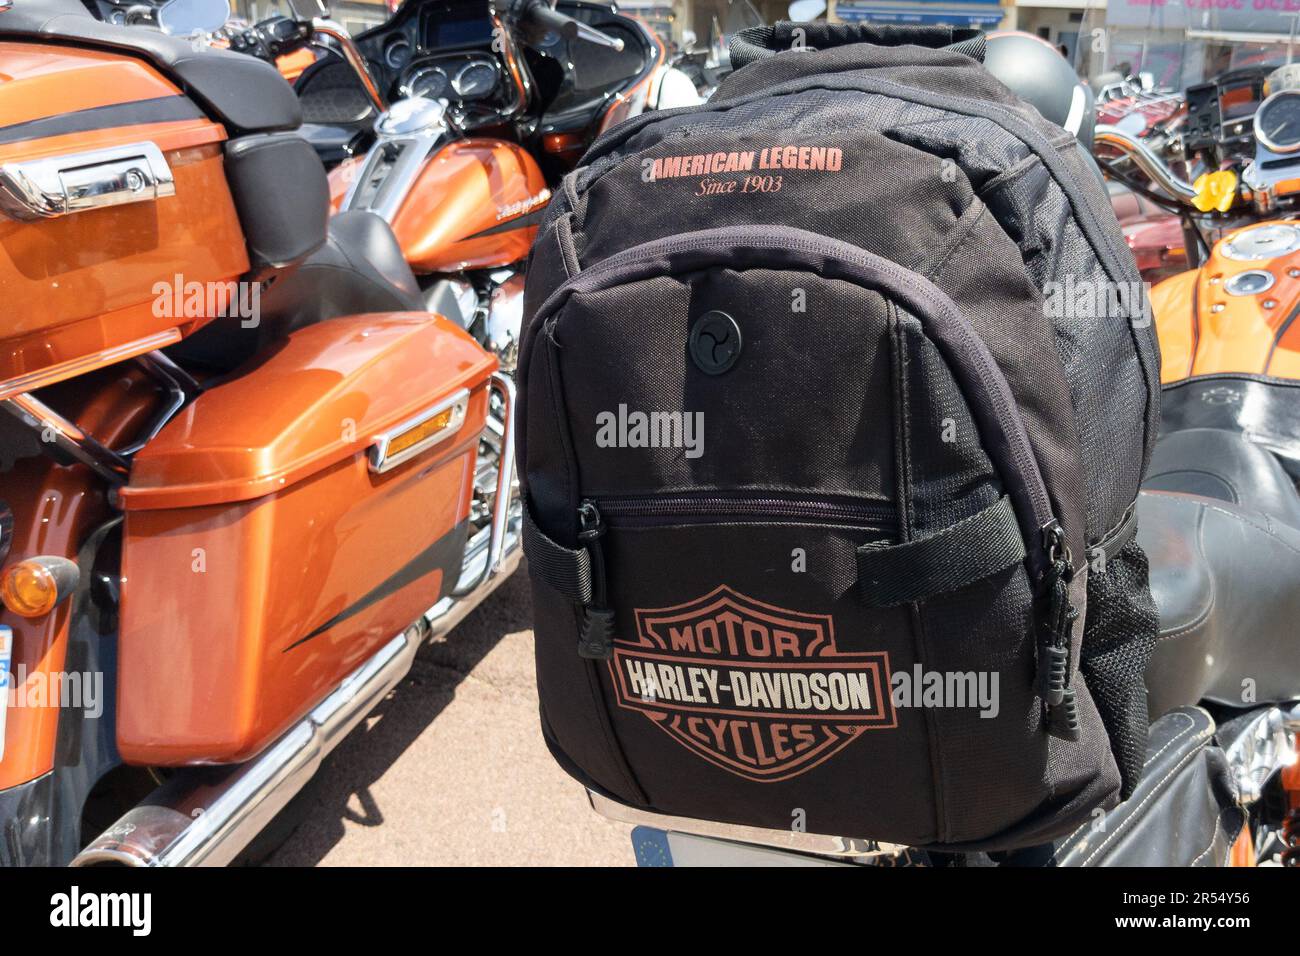 Bordeaux , Aquitaine France - 10 09 2022 : harley-davidson brand logo and  text sign on motorcycle backpack saddle bag american legend since 1903 moto  Stock Photo - Alamy